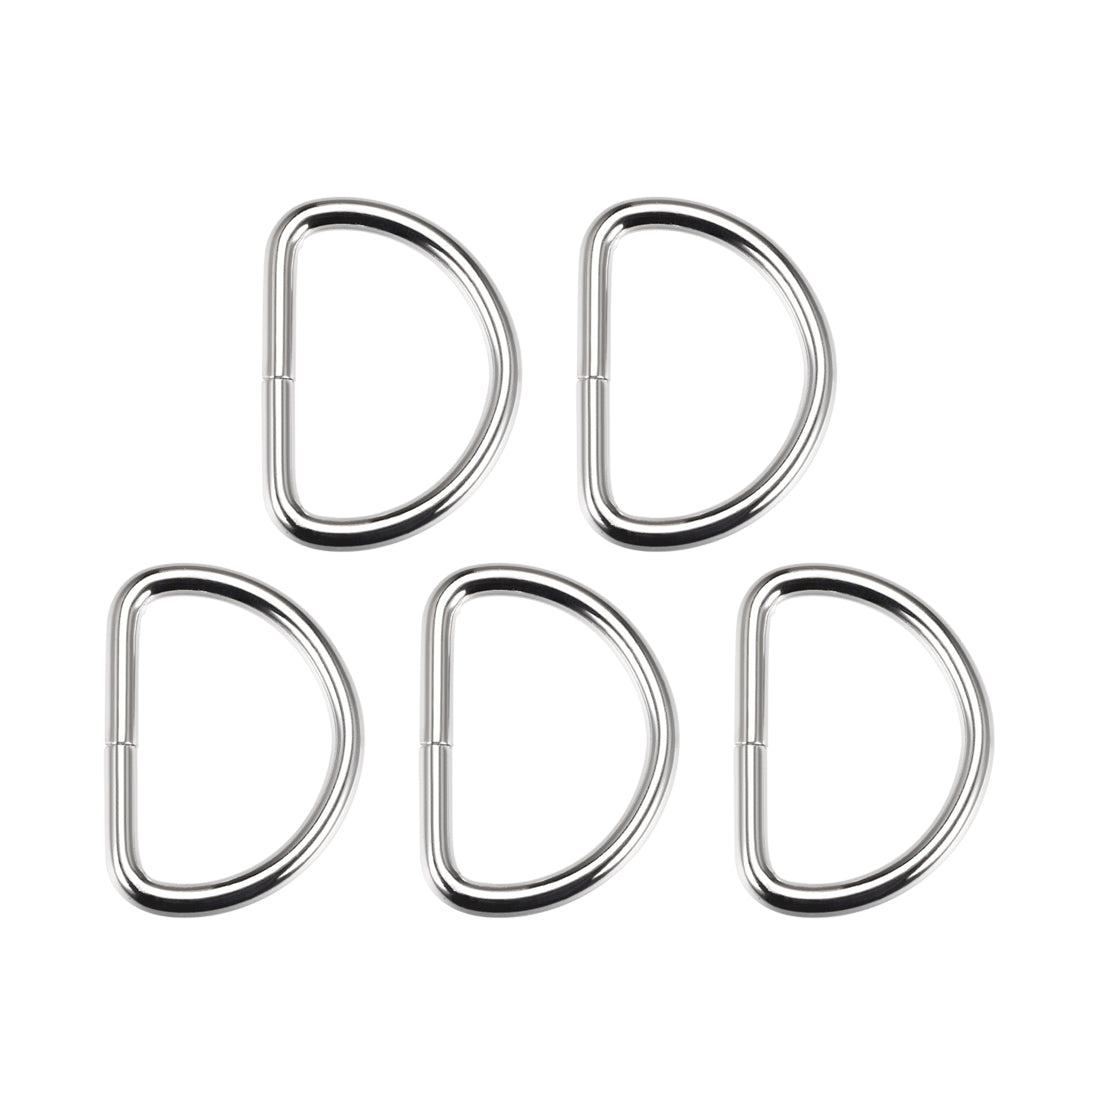 uxcell Uxcell 5 Pcs D Ring Buckle 1.6 Inch Metal Semi-Circular D-Rings Silver Tone for Hardware Bags Belts Craft DIY Accessories